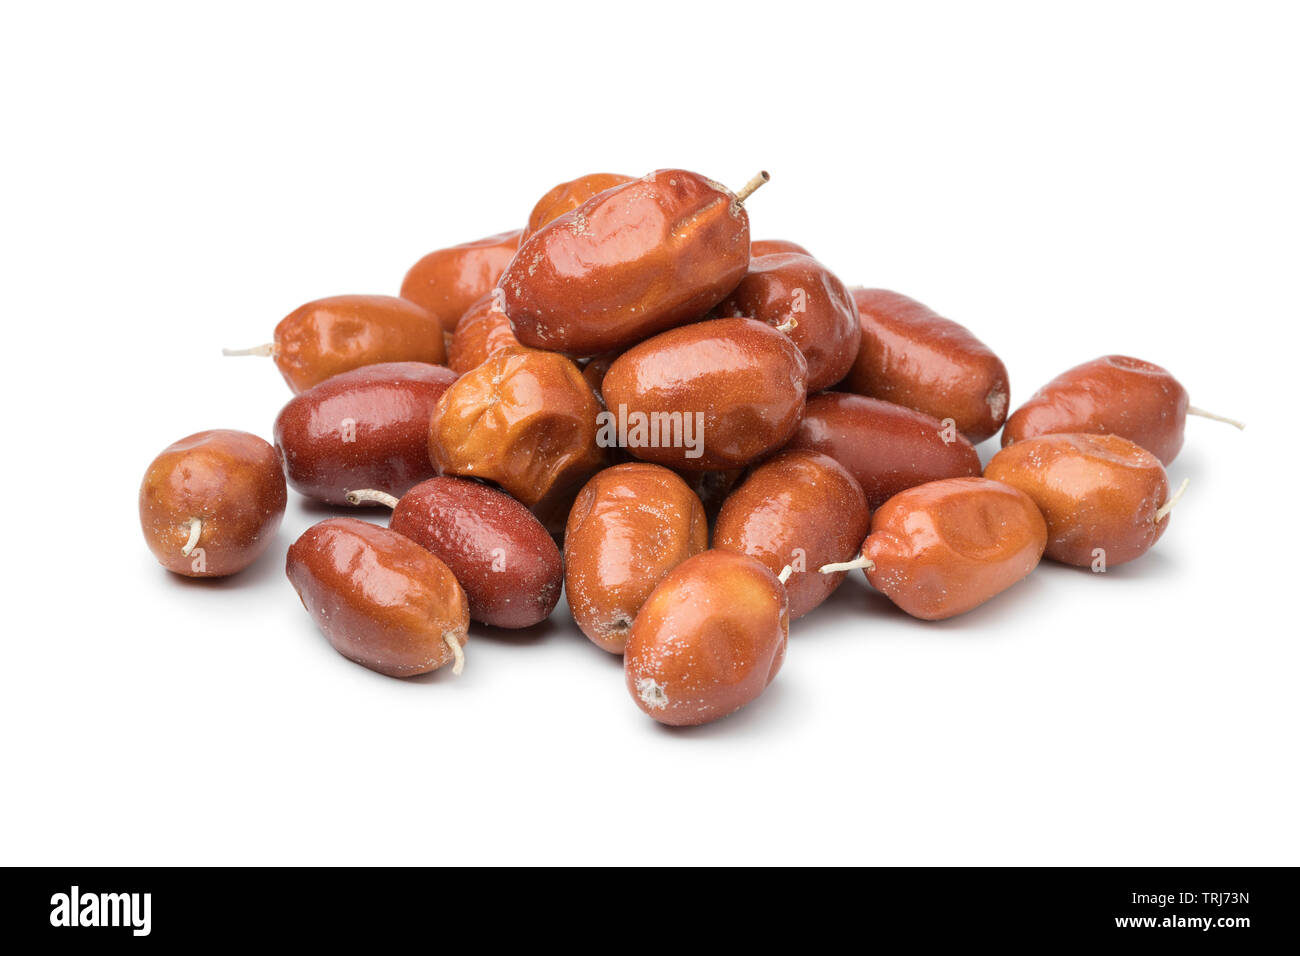 Heap of dried fresh organic fruit of the Oleaster, Silver berry or russian olive close up isolated on white background Stock Photo